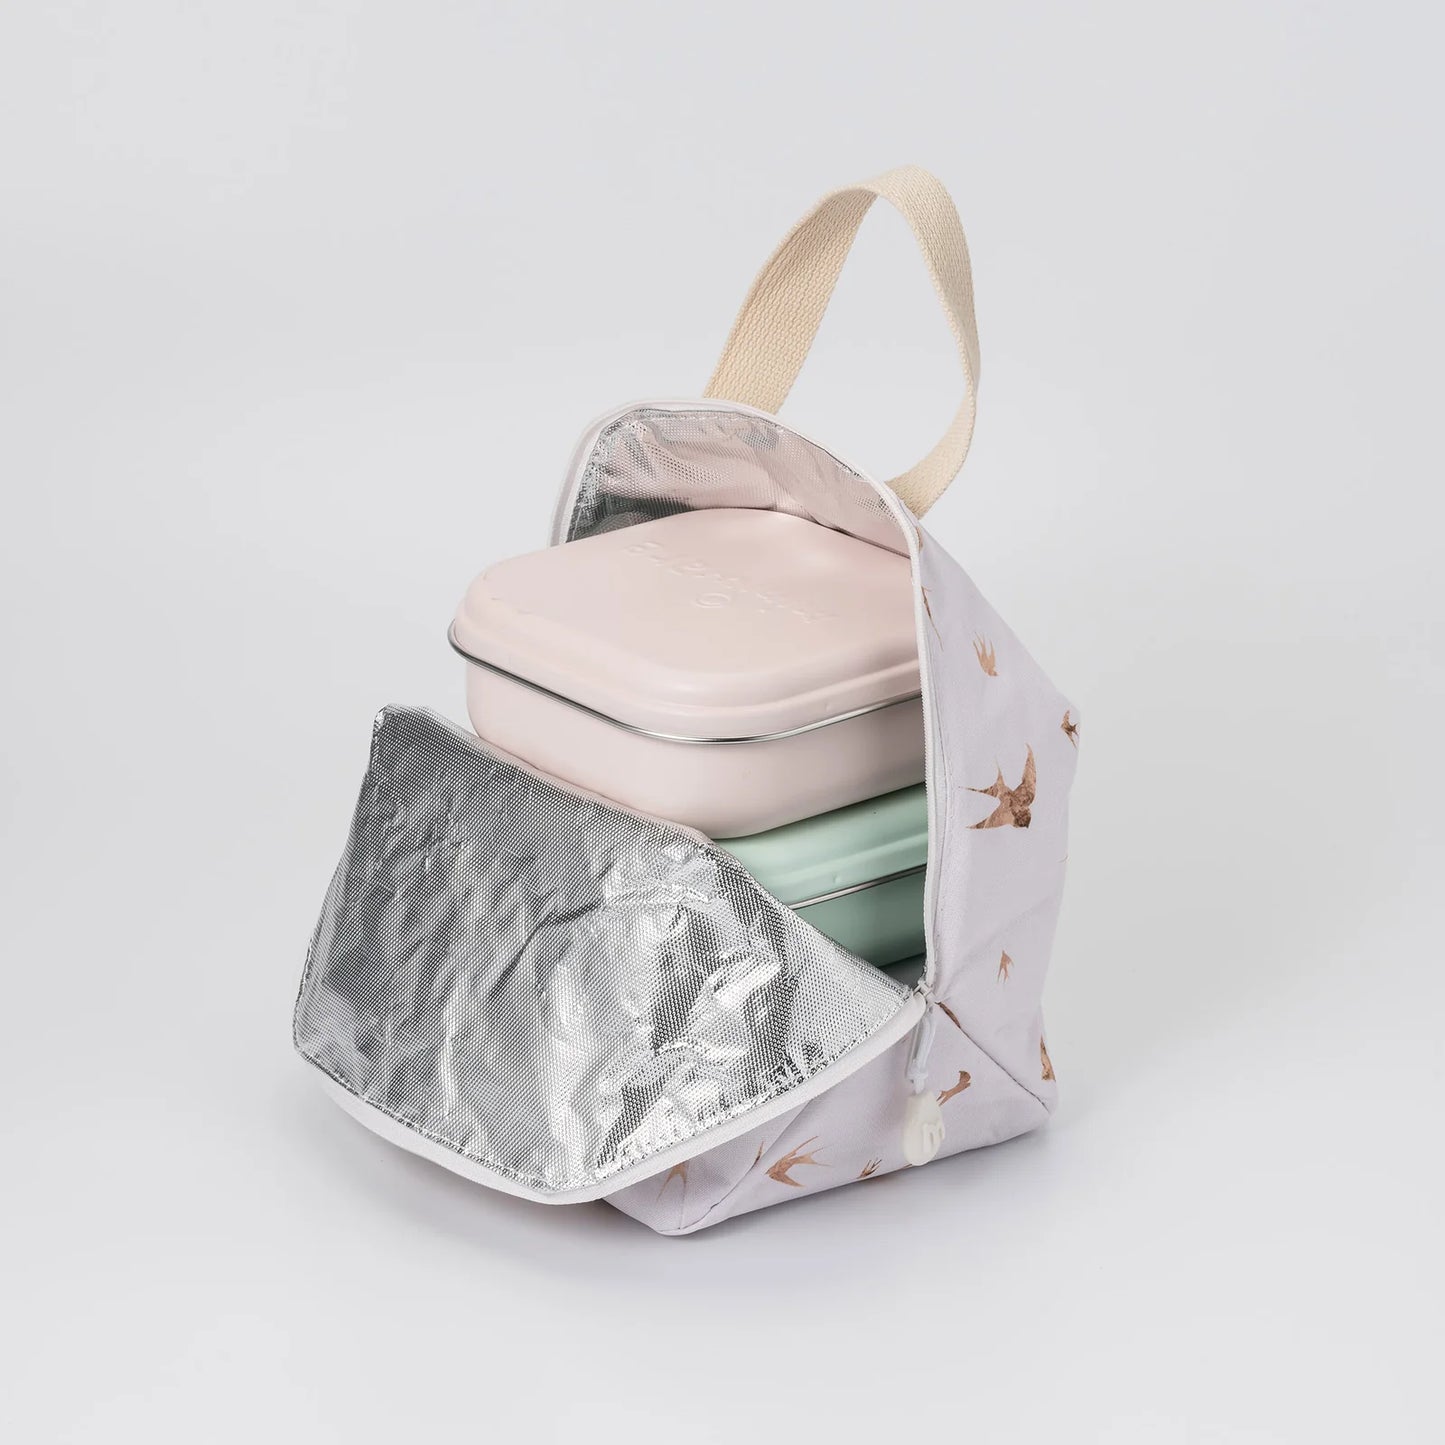 Meal Tote lunch bag